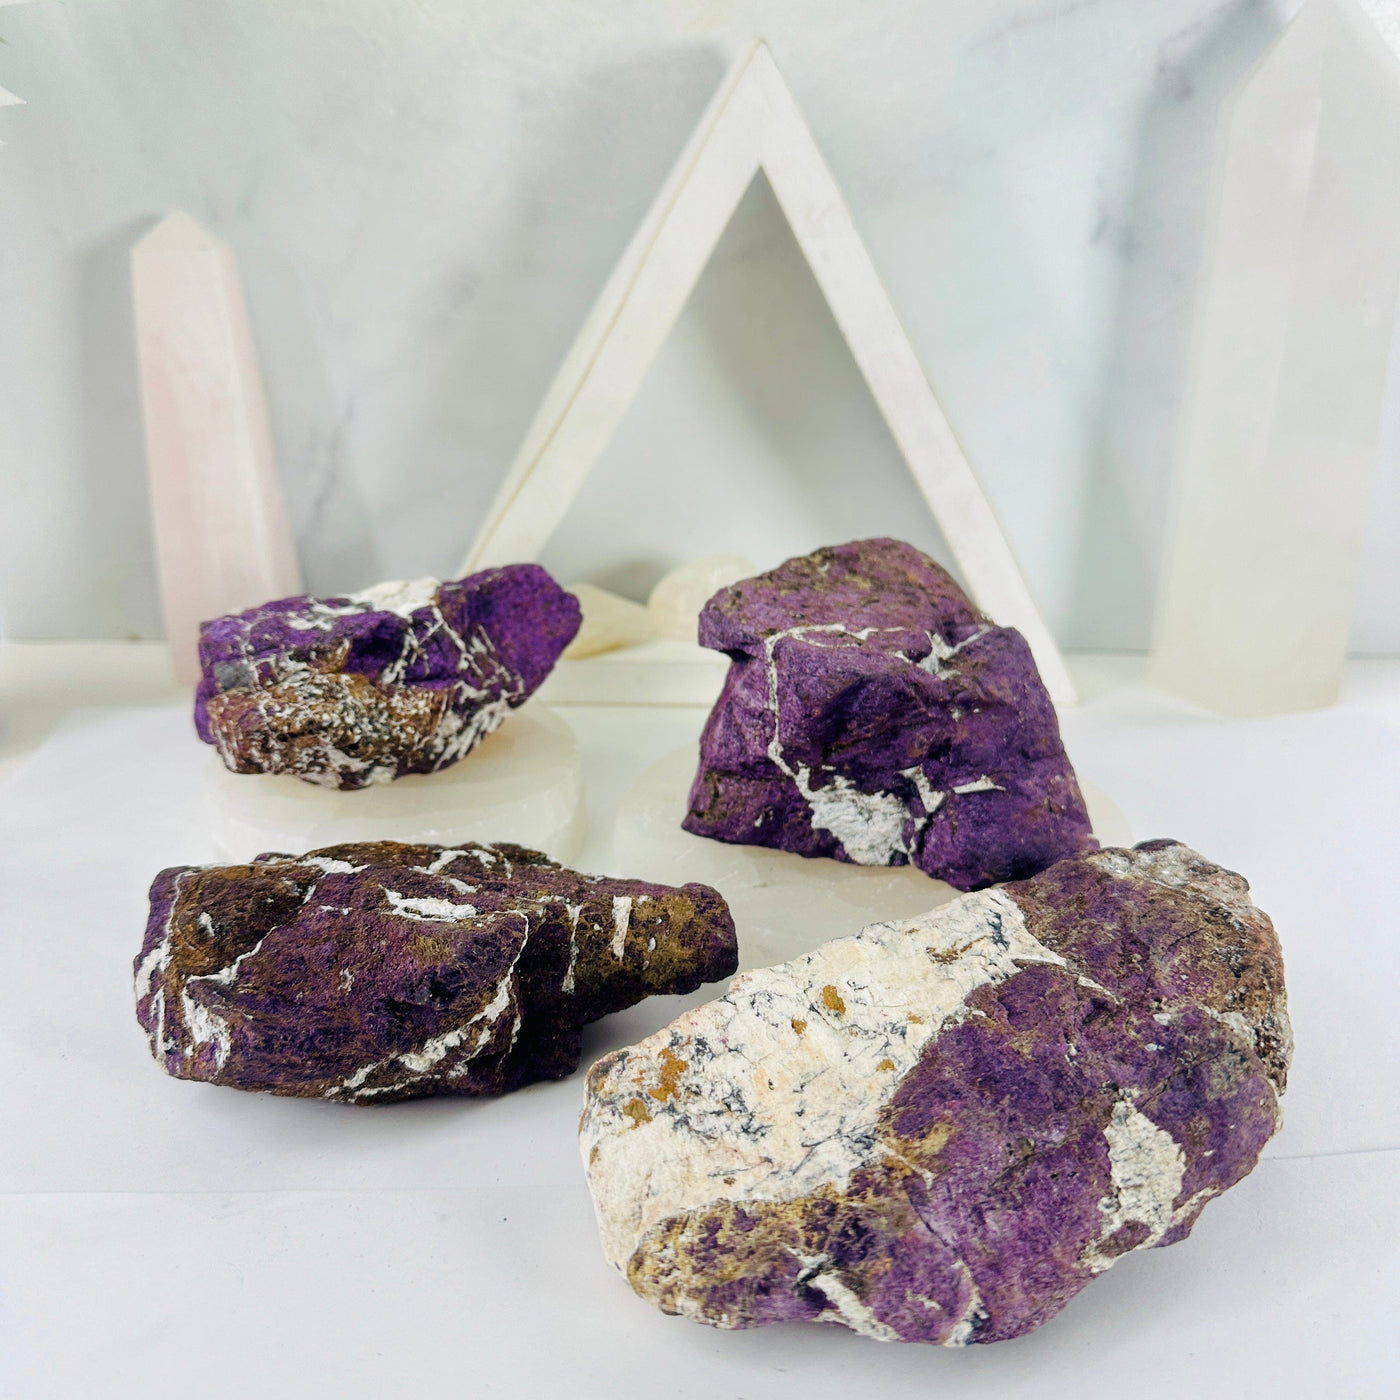 Purpurite Crystal Natural Rough Stone - YOU CHOOSE all four variants